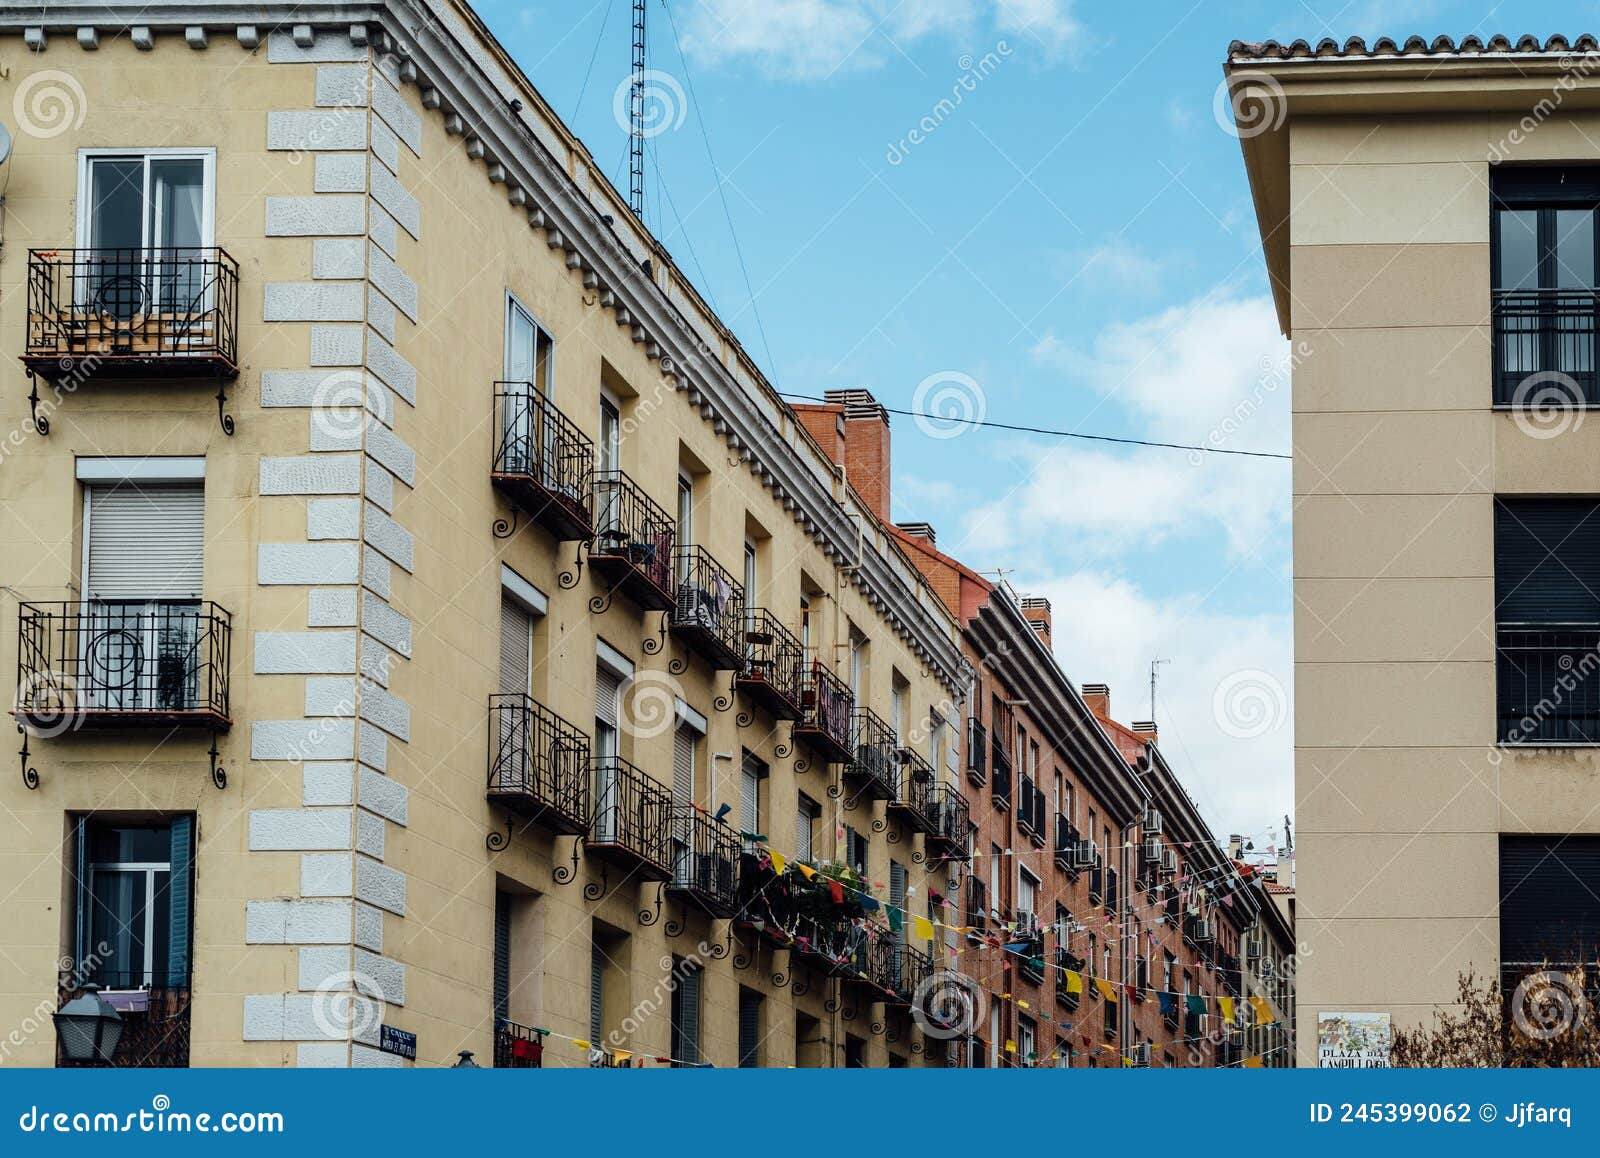 low angle view of old residential buildings in lavapies quarter in central madrid